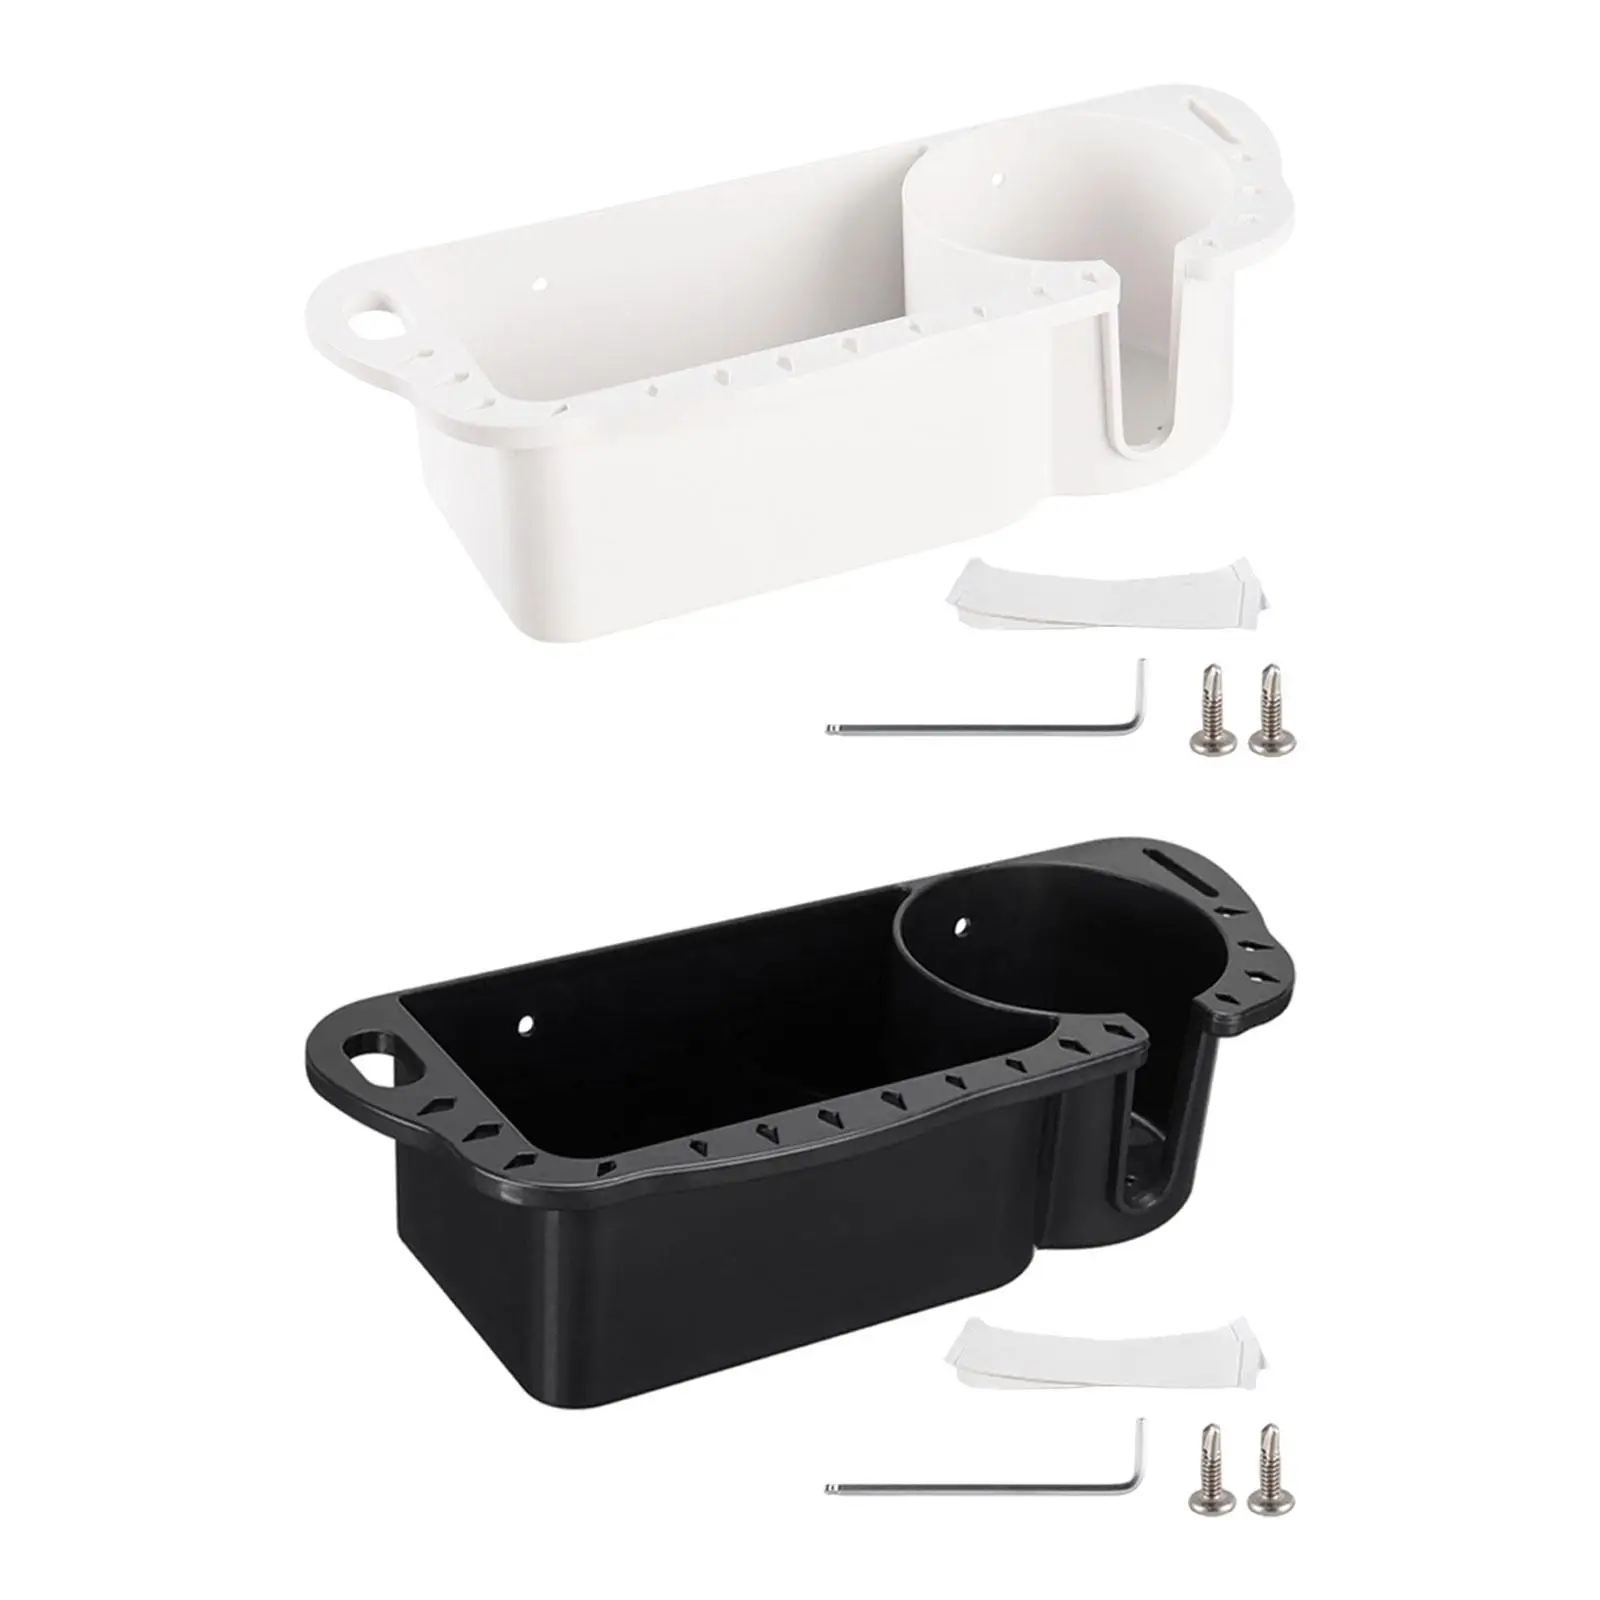 Boat Caddy Organizer Universal Stable Boat Accessories Marine Cup Holder Marine Storage Caddy Box for Fly Fishing Equipment